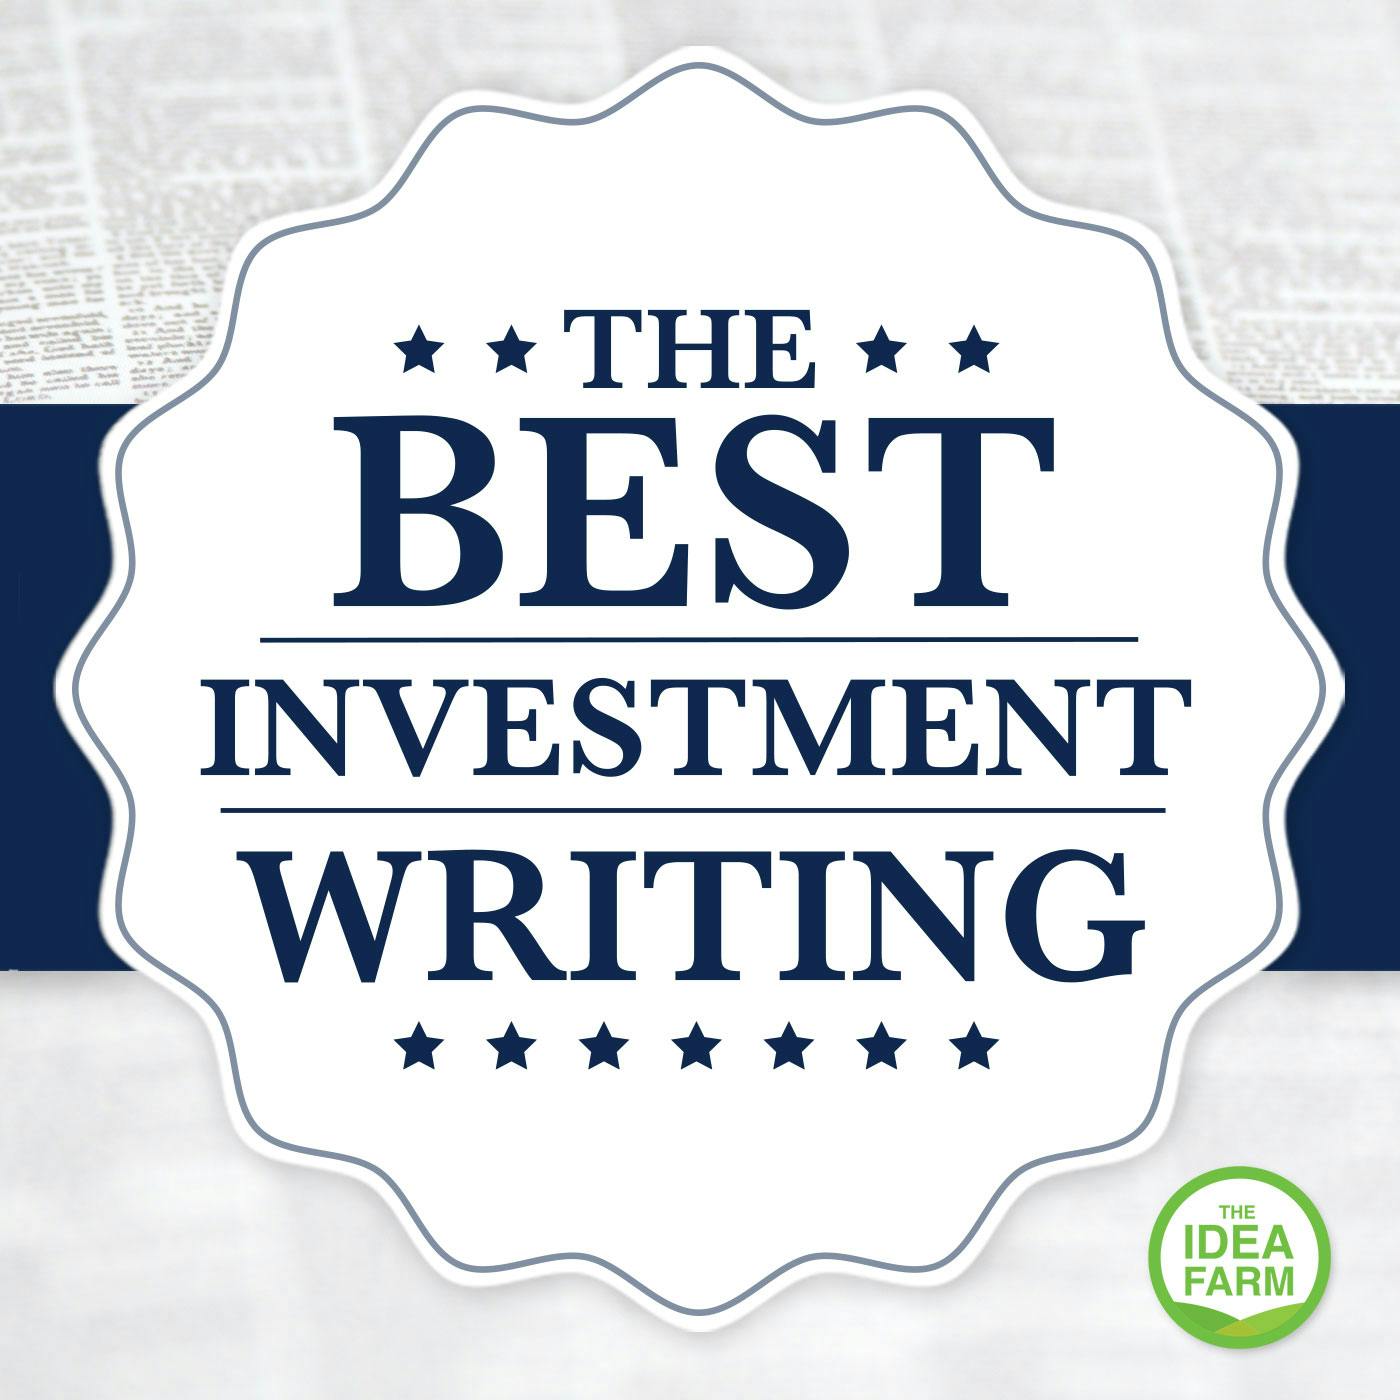 The Best Investment Writing Volume 3: Frazer Rice, Calamos Wealth Management – Preparing For The Hurricane Of Wealth